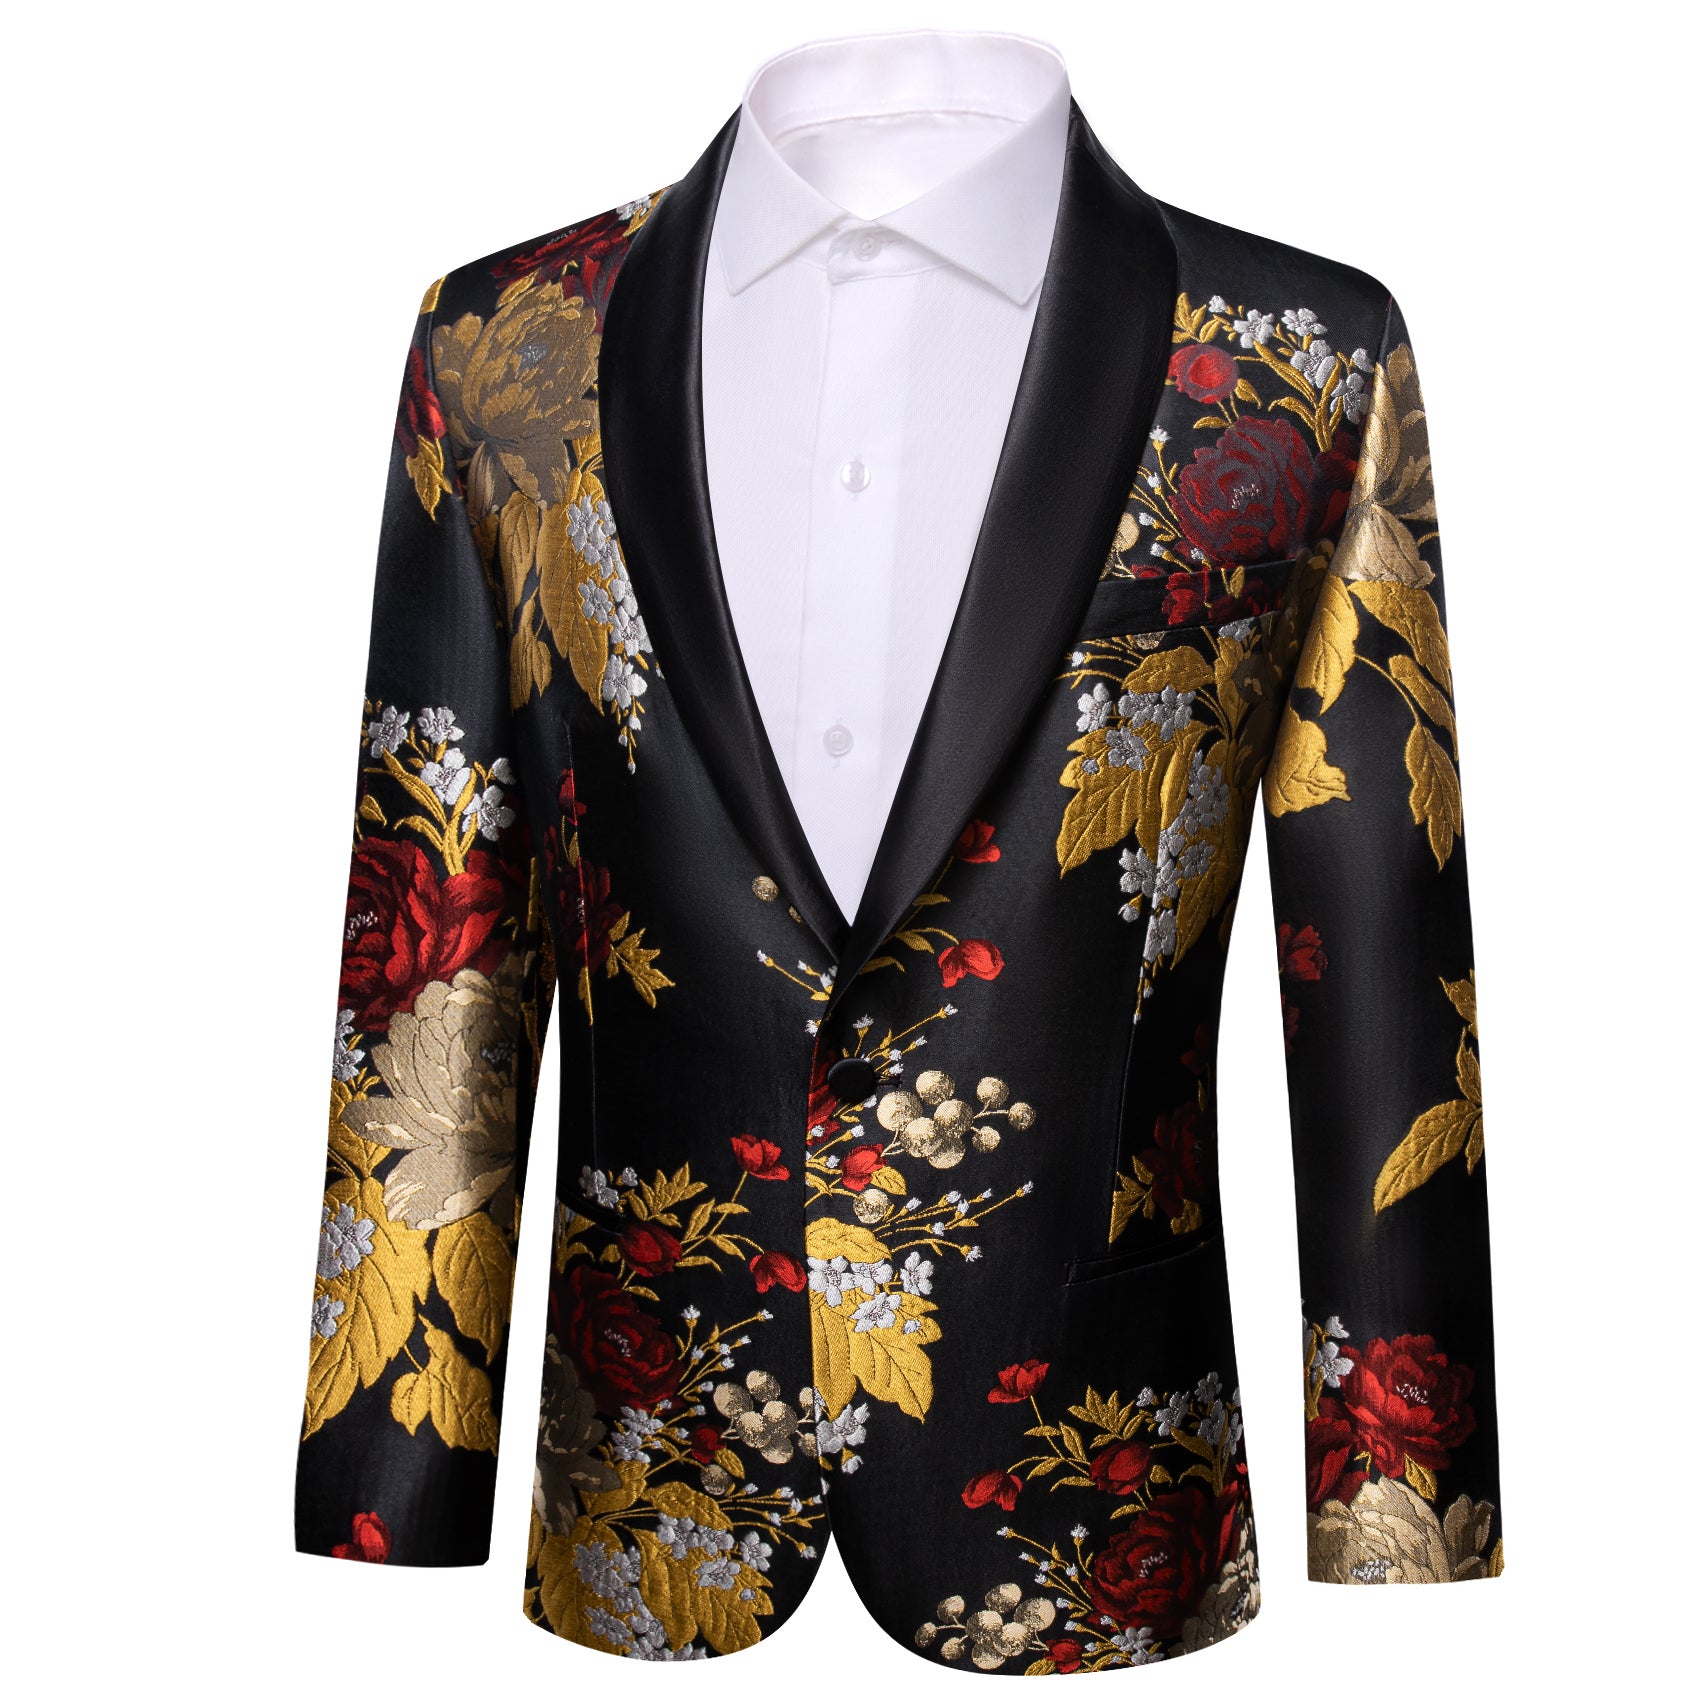 Men floral blazer jacket gold white jacket, Men's Fashion, Coats, Jackets  and Outerwear on Carousell